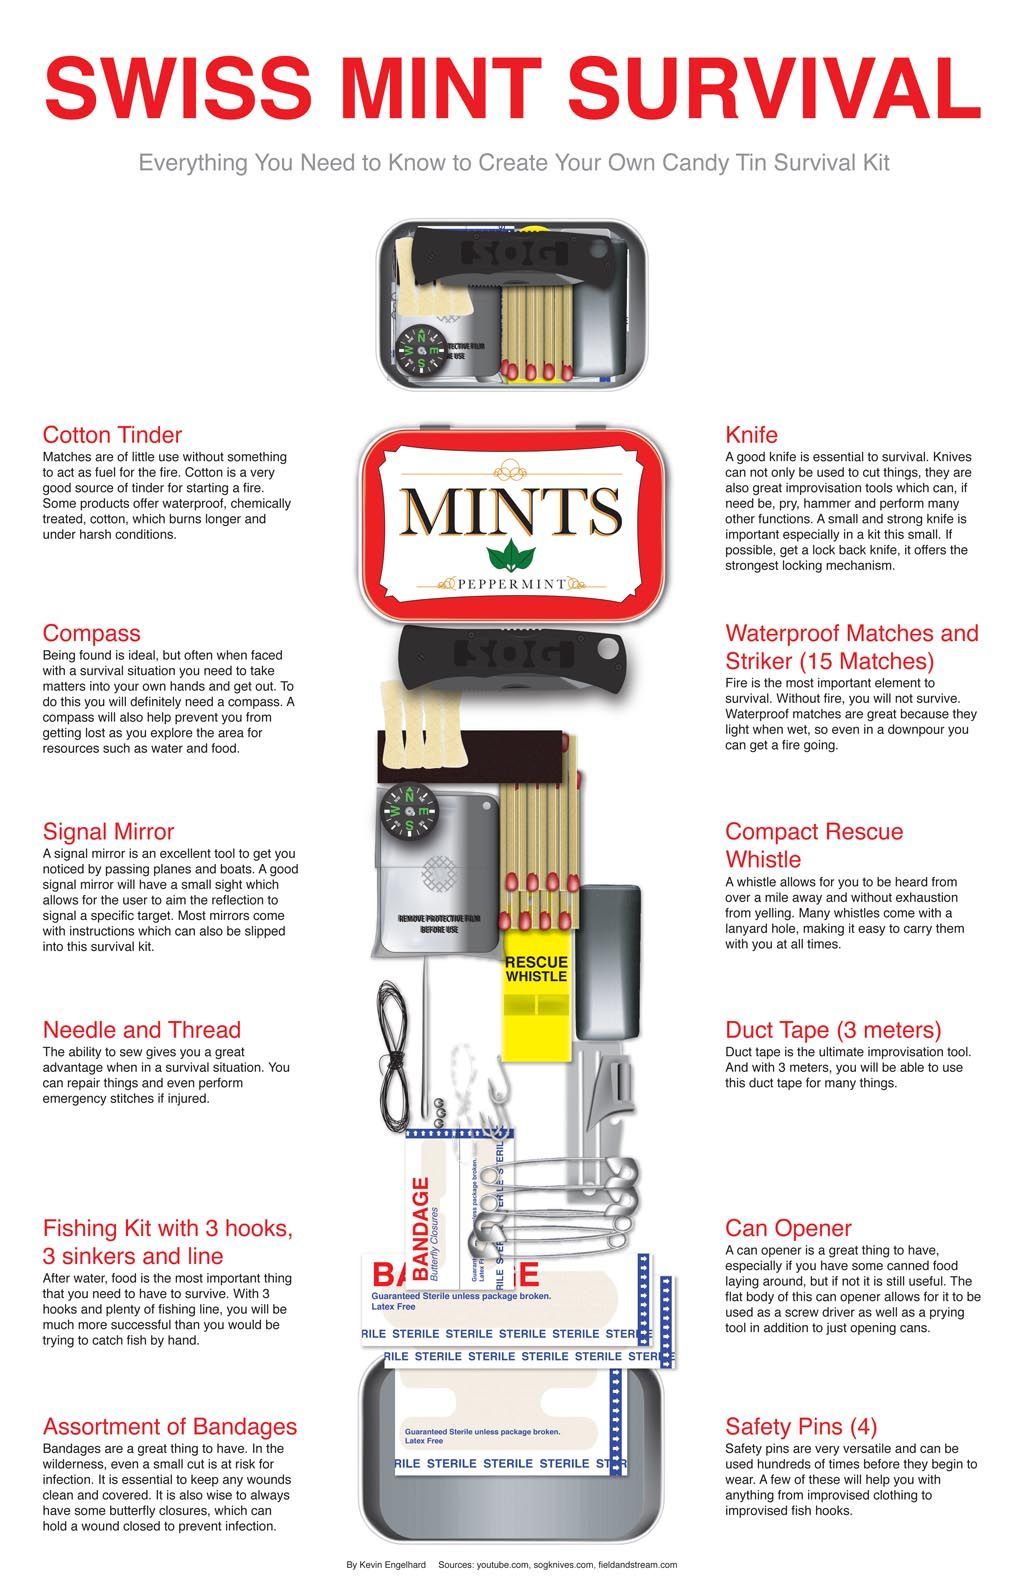 Swiss Mint Survival – A Survival Kit In A Candy Tin